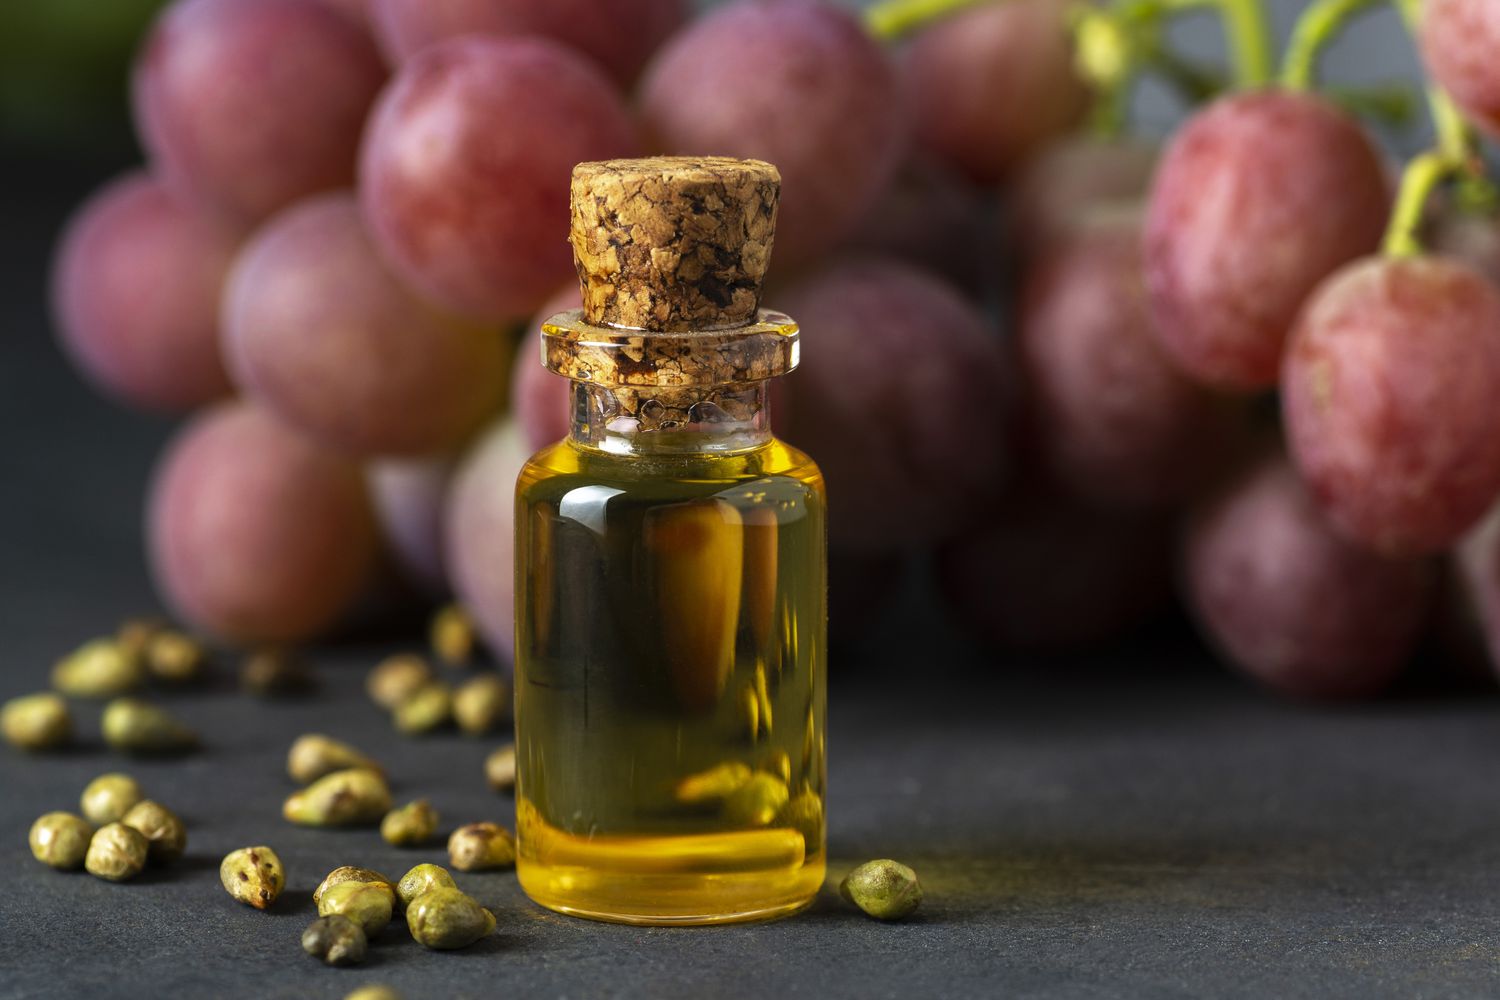 Where Can I Find Grape Seed Oil